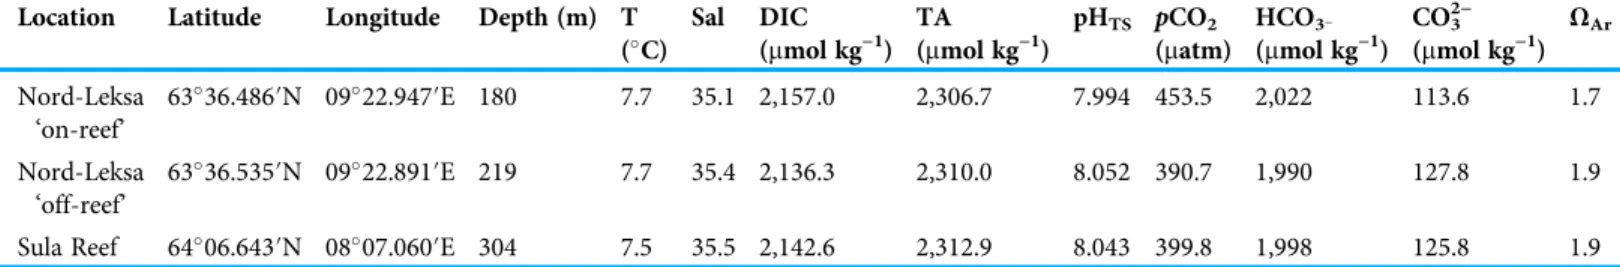 Table 4 Carbonate chemistry and physical seawater properties at three deployment locations (inshore at two sites in the Trondheimsfjord (Leksa on- and off-reef) and offshore at the Sula Reef)